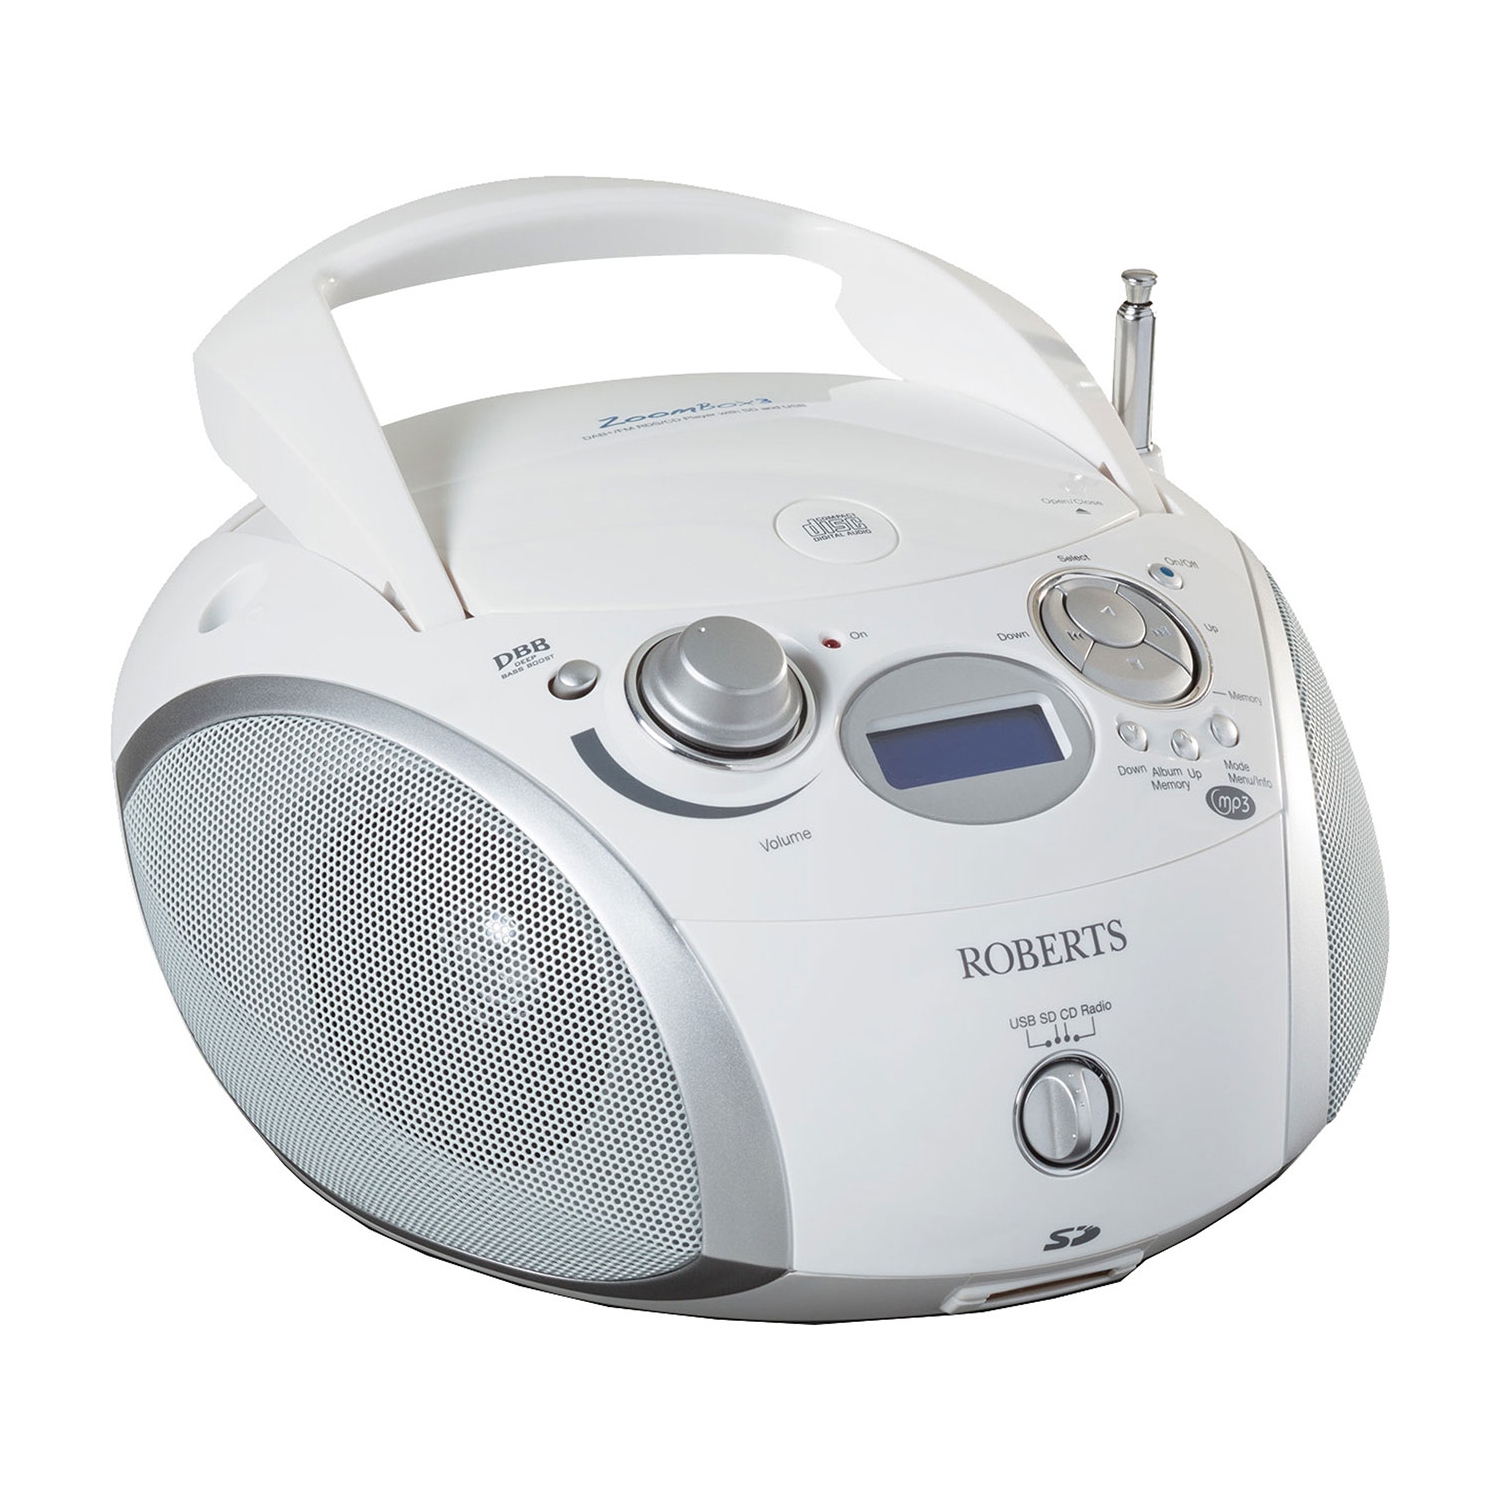 DAB RADIO AND CD PLAYER - Electrical